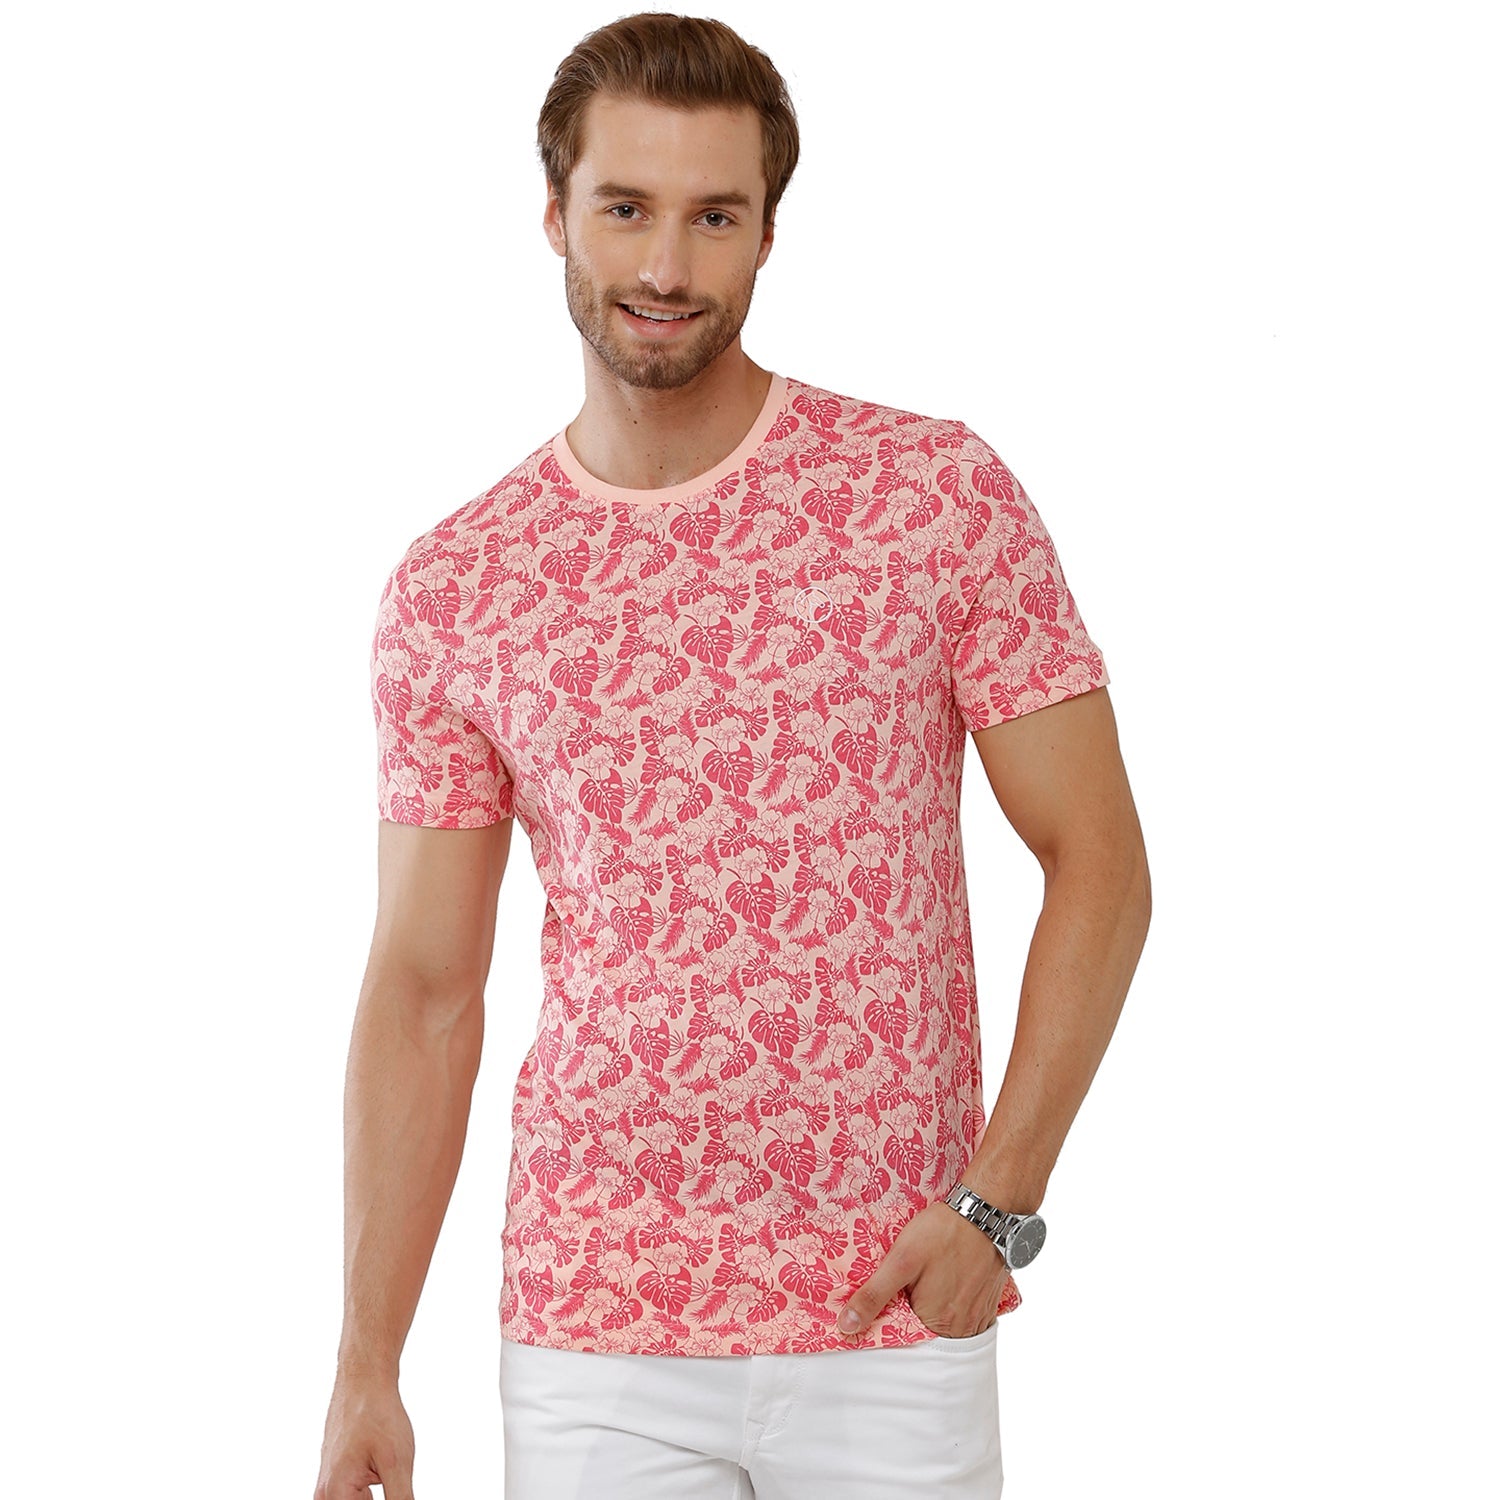 Classic Polo Bro Mens 100% Cotton Printed Half Sleeve Slim Fit Crew Neck Pink Color T-Shirt (BRCN - 475 A SF C) Classic Polo 